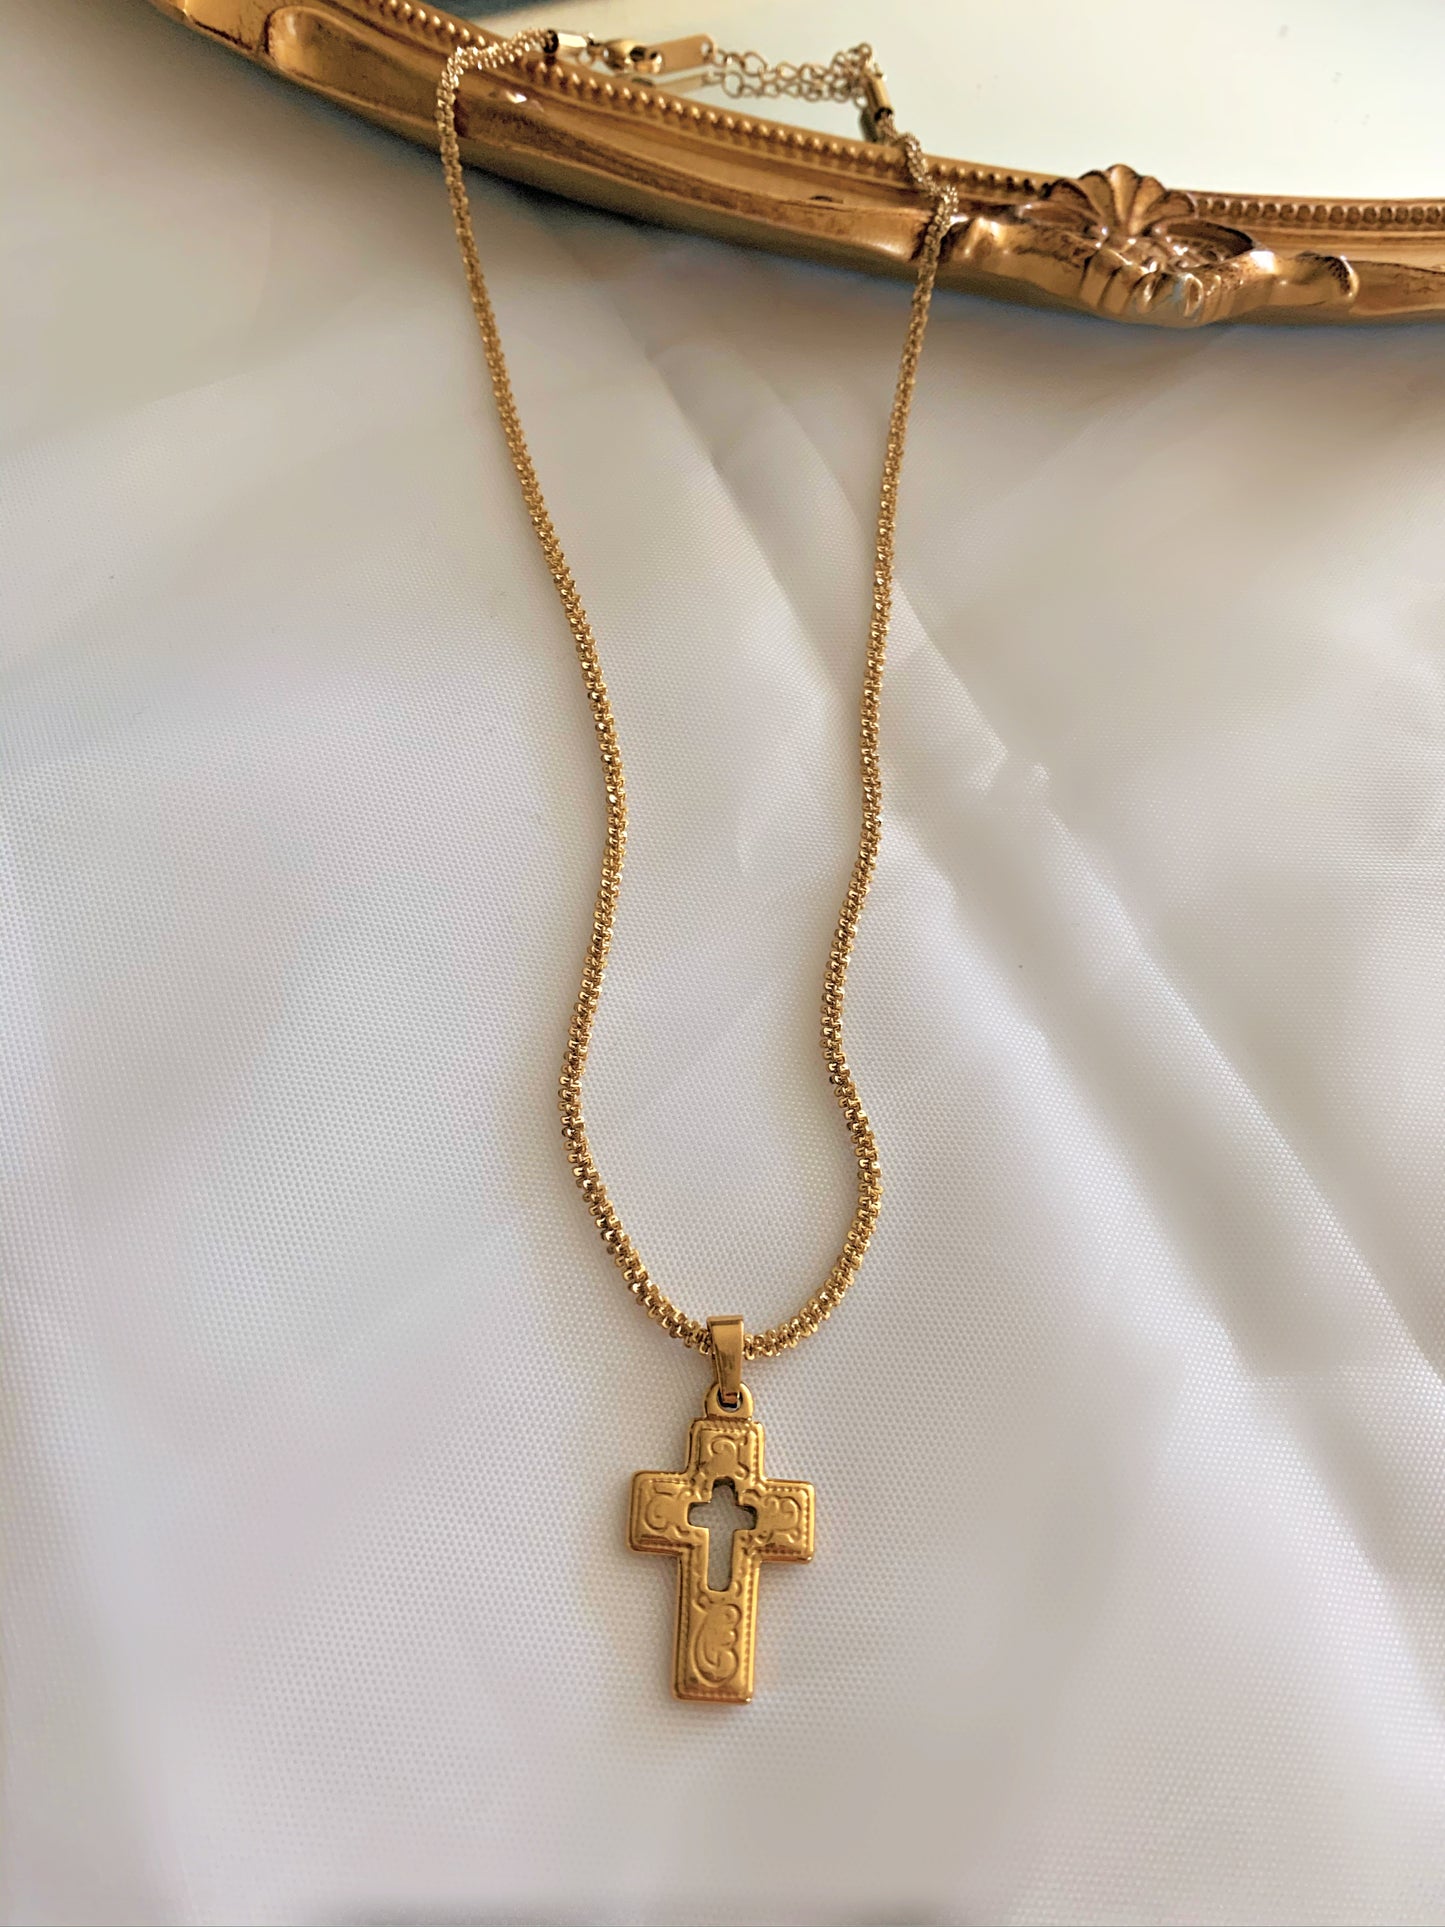 Gold Engraved Cross Necklace